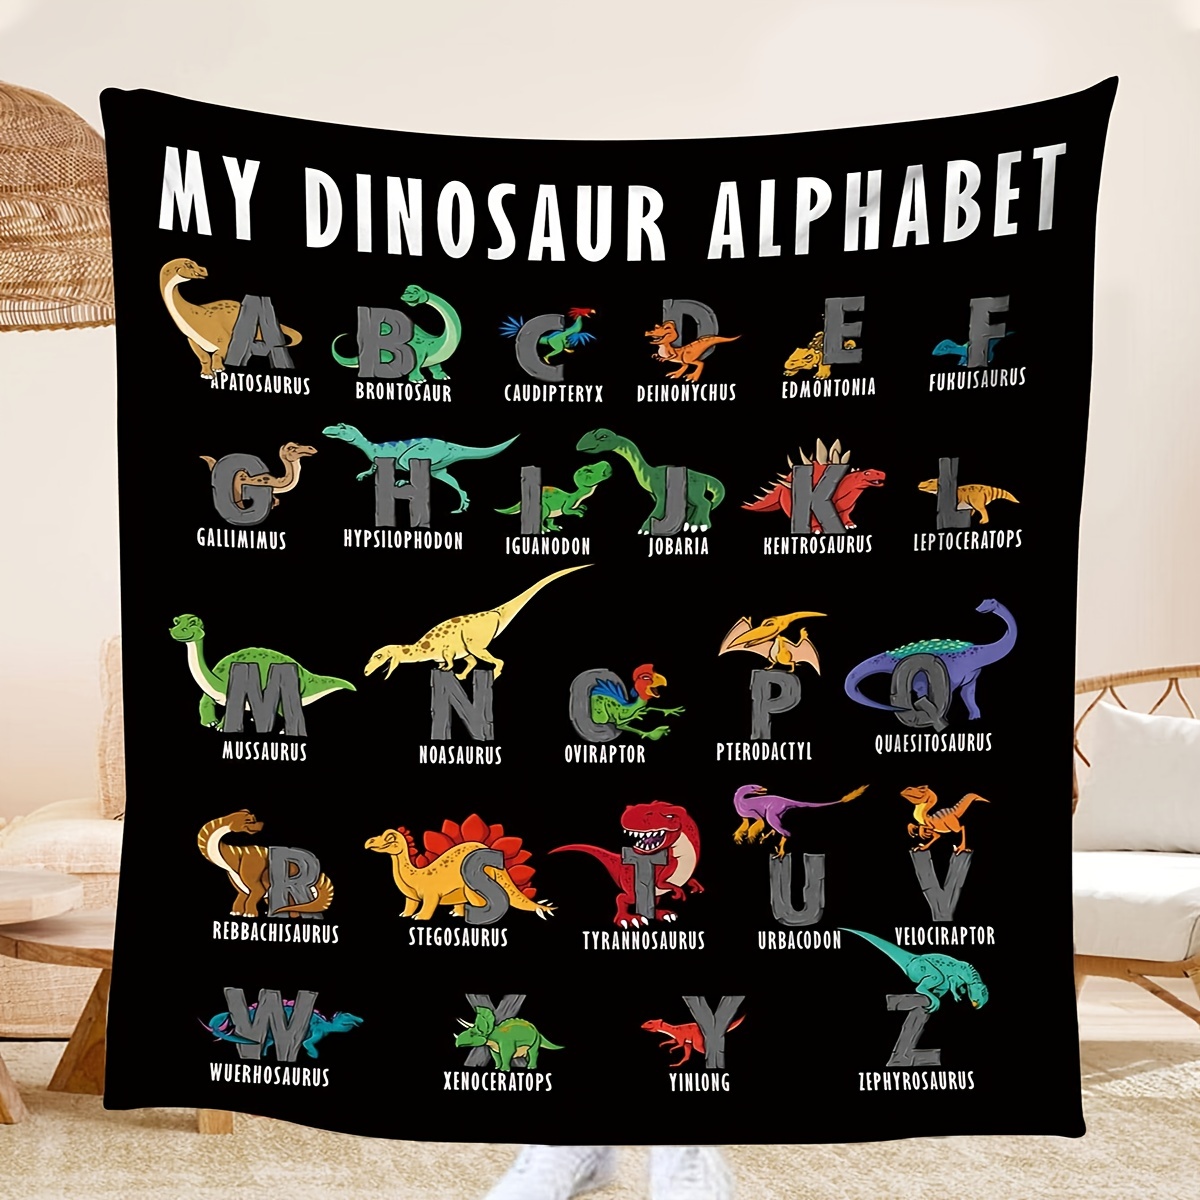 

1pc Soft And Cozy Dinosaur Flannel Blanket - Perfect For Travel, Sofa, Bed, And Home Decor - Ideal Birthday Or Holiday Gift - Available All Season